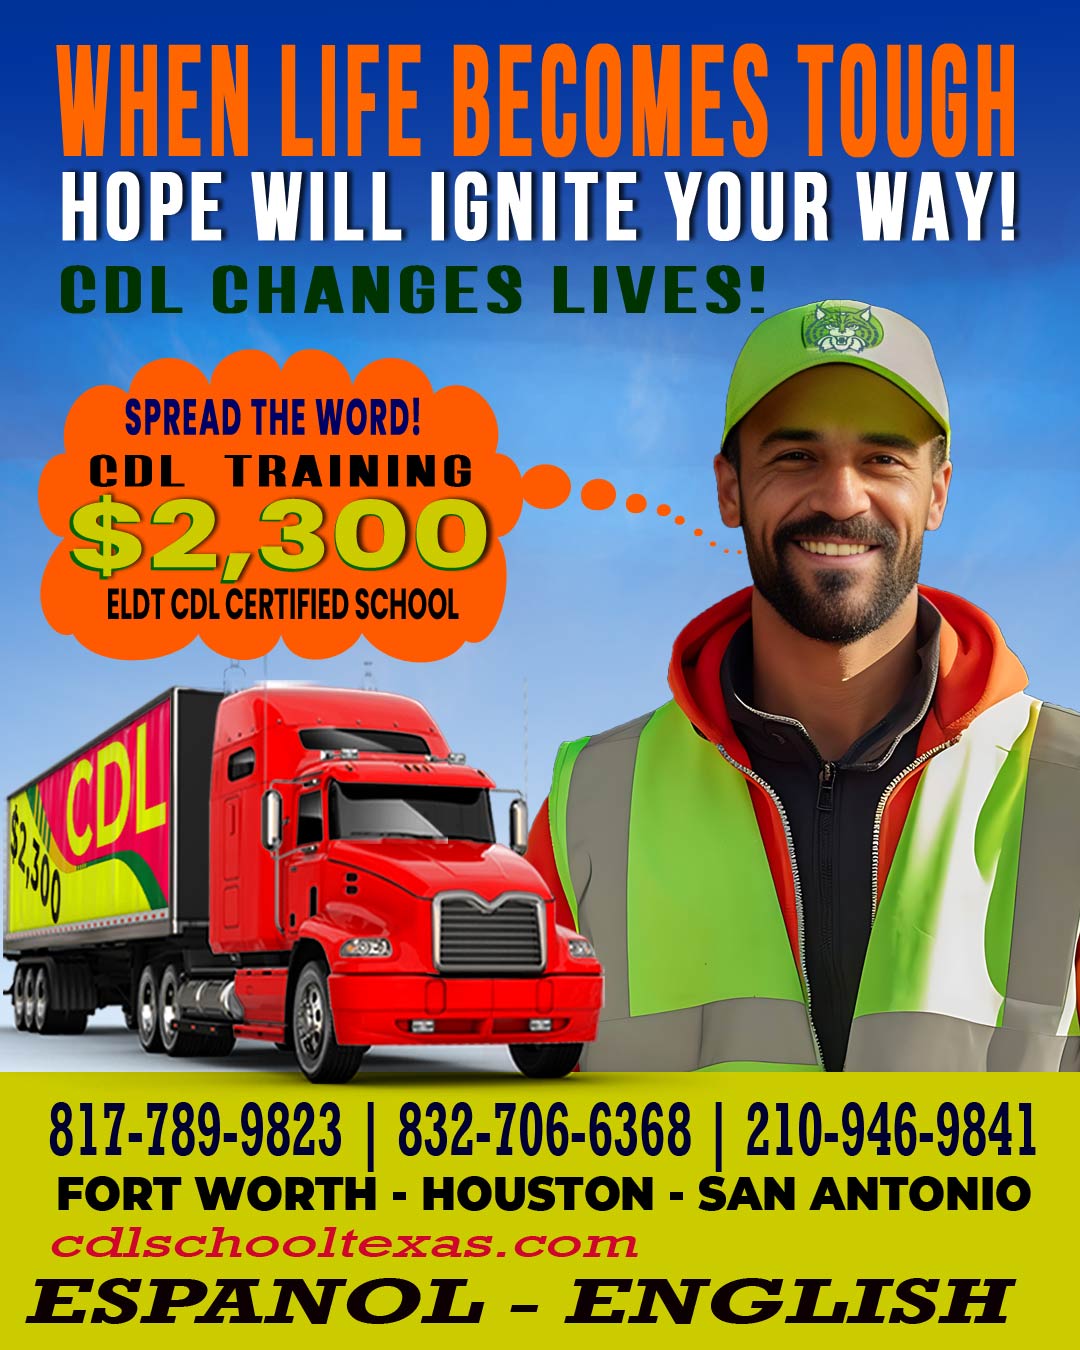 Discover CDL School Fort Worth TX: Professional Truck Driving Training with Comprehensive Services and Multiple Locations